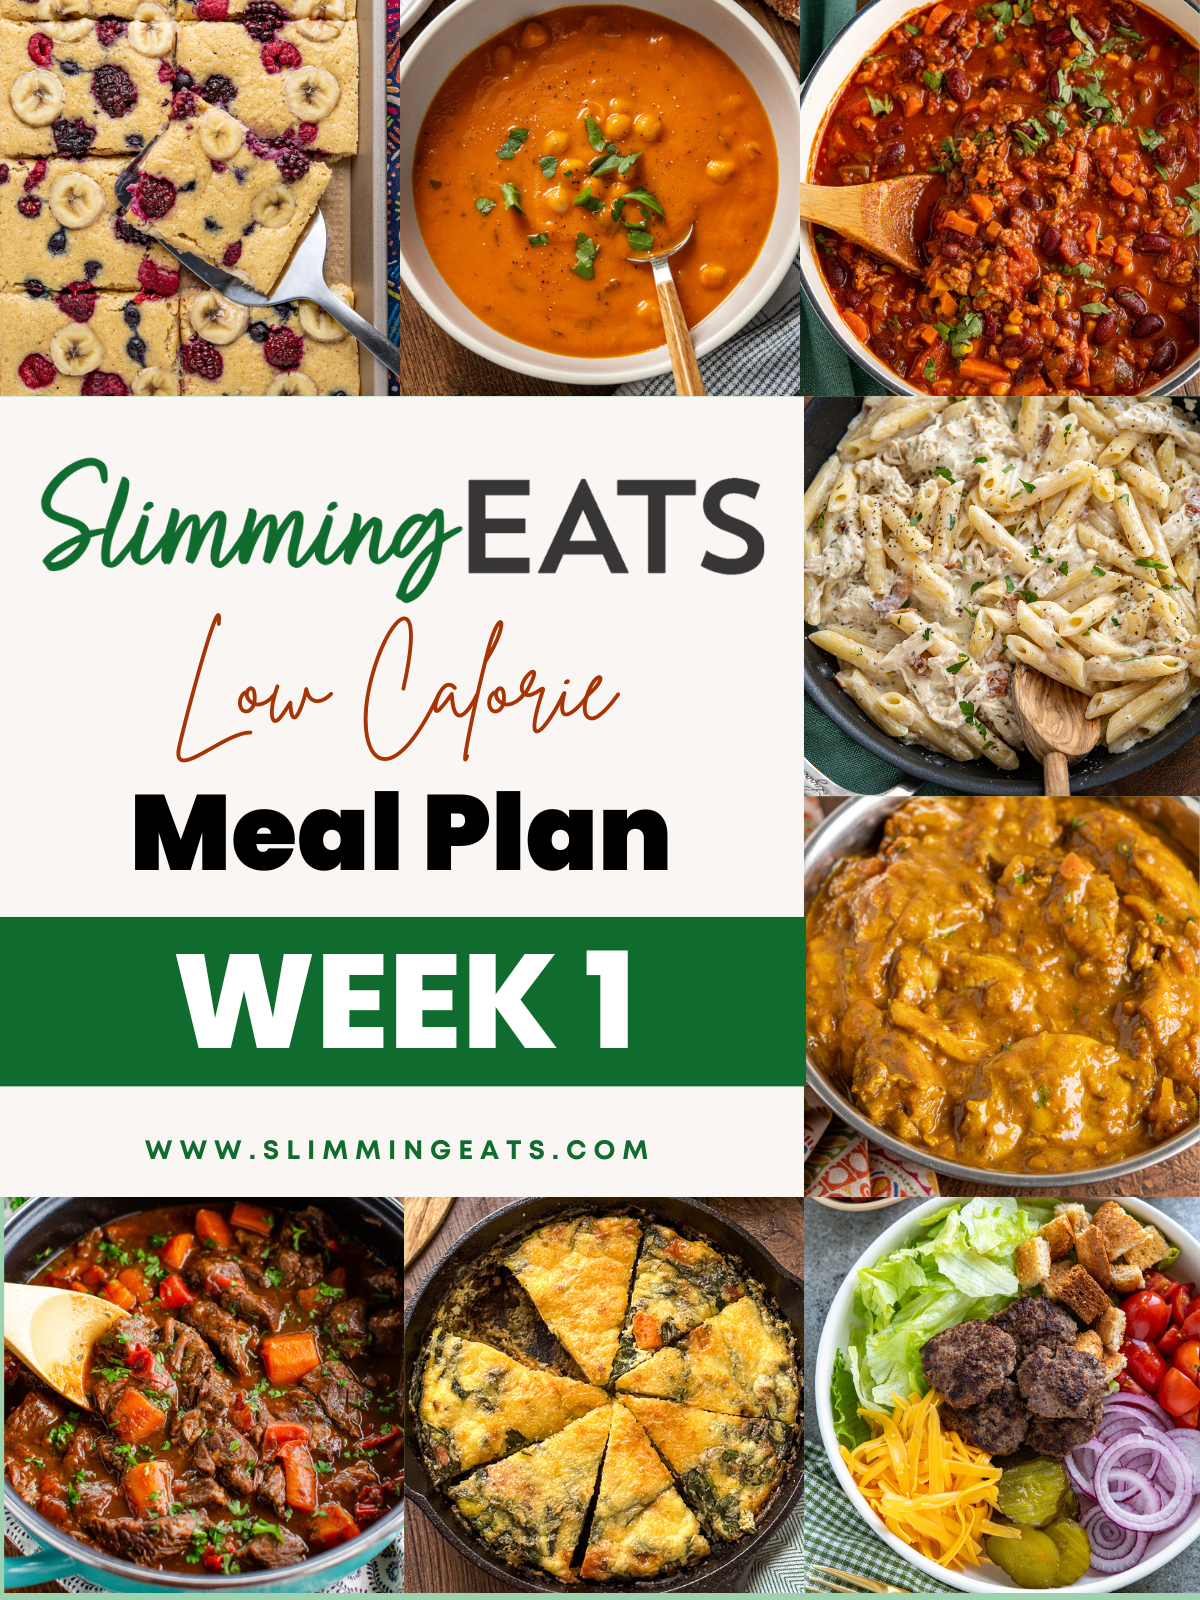 meal plan week 1 featured images